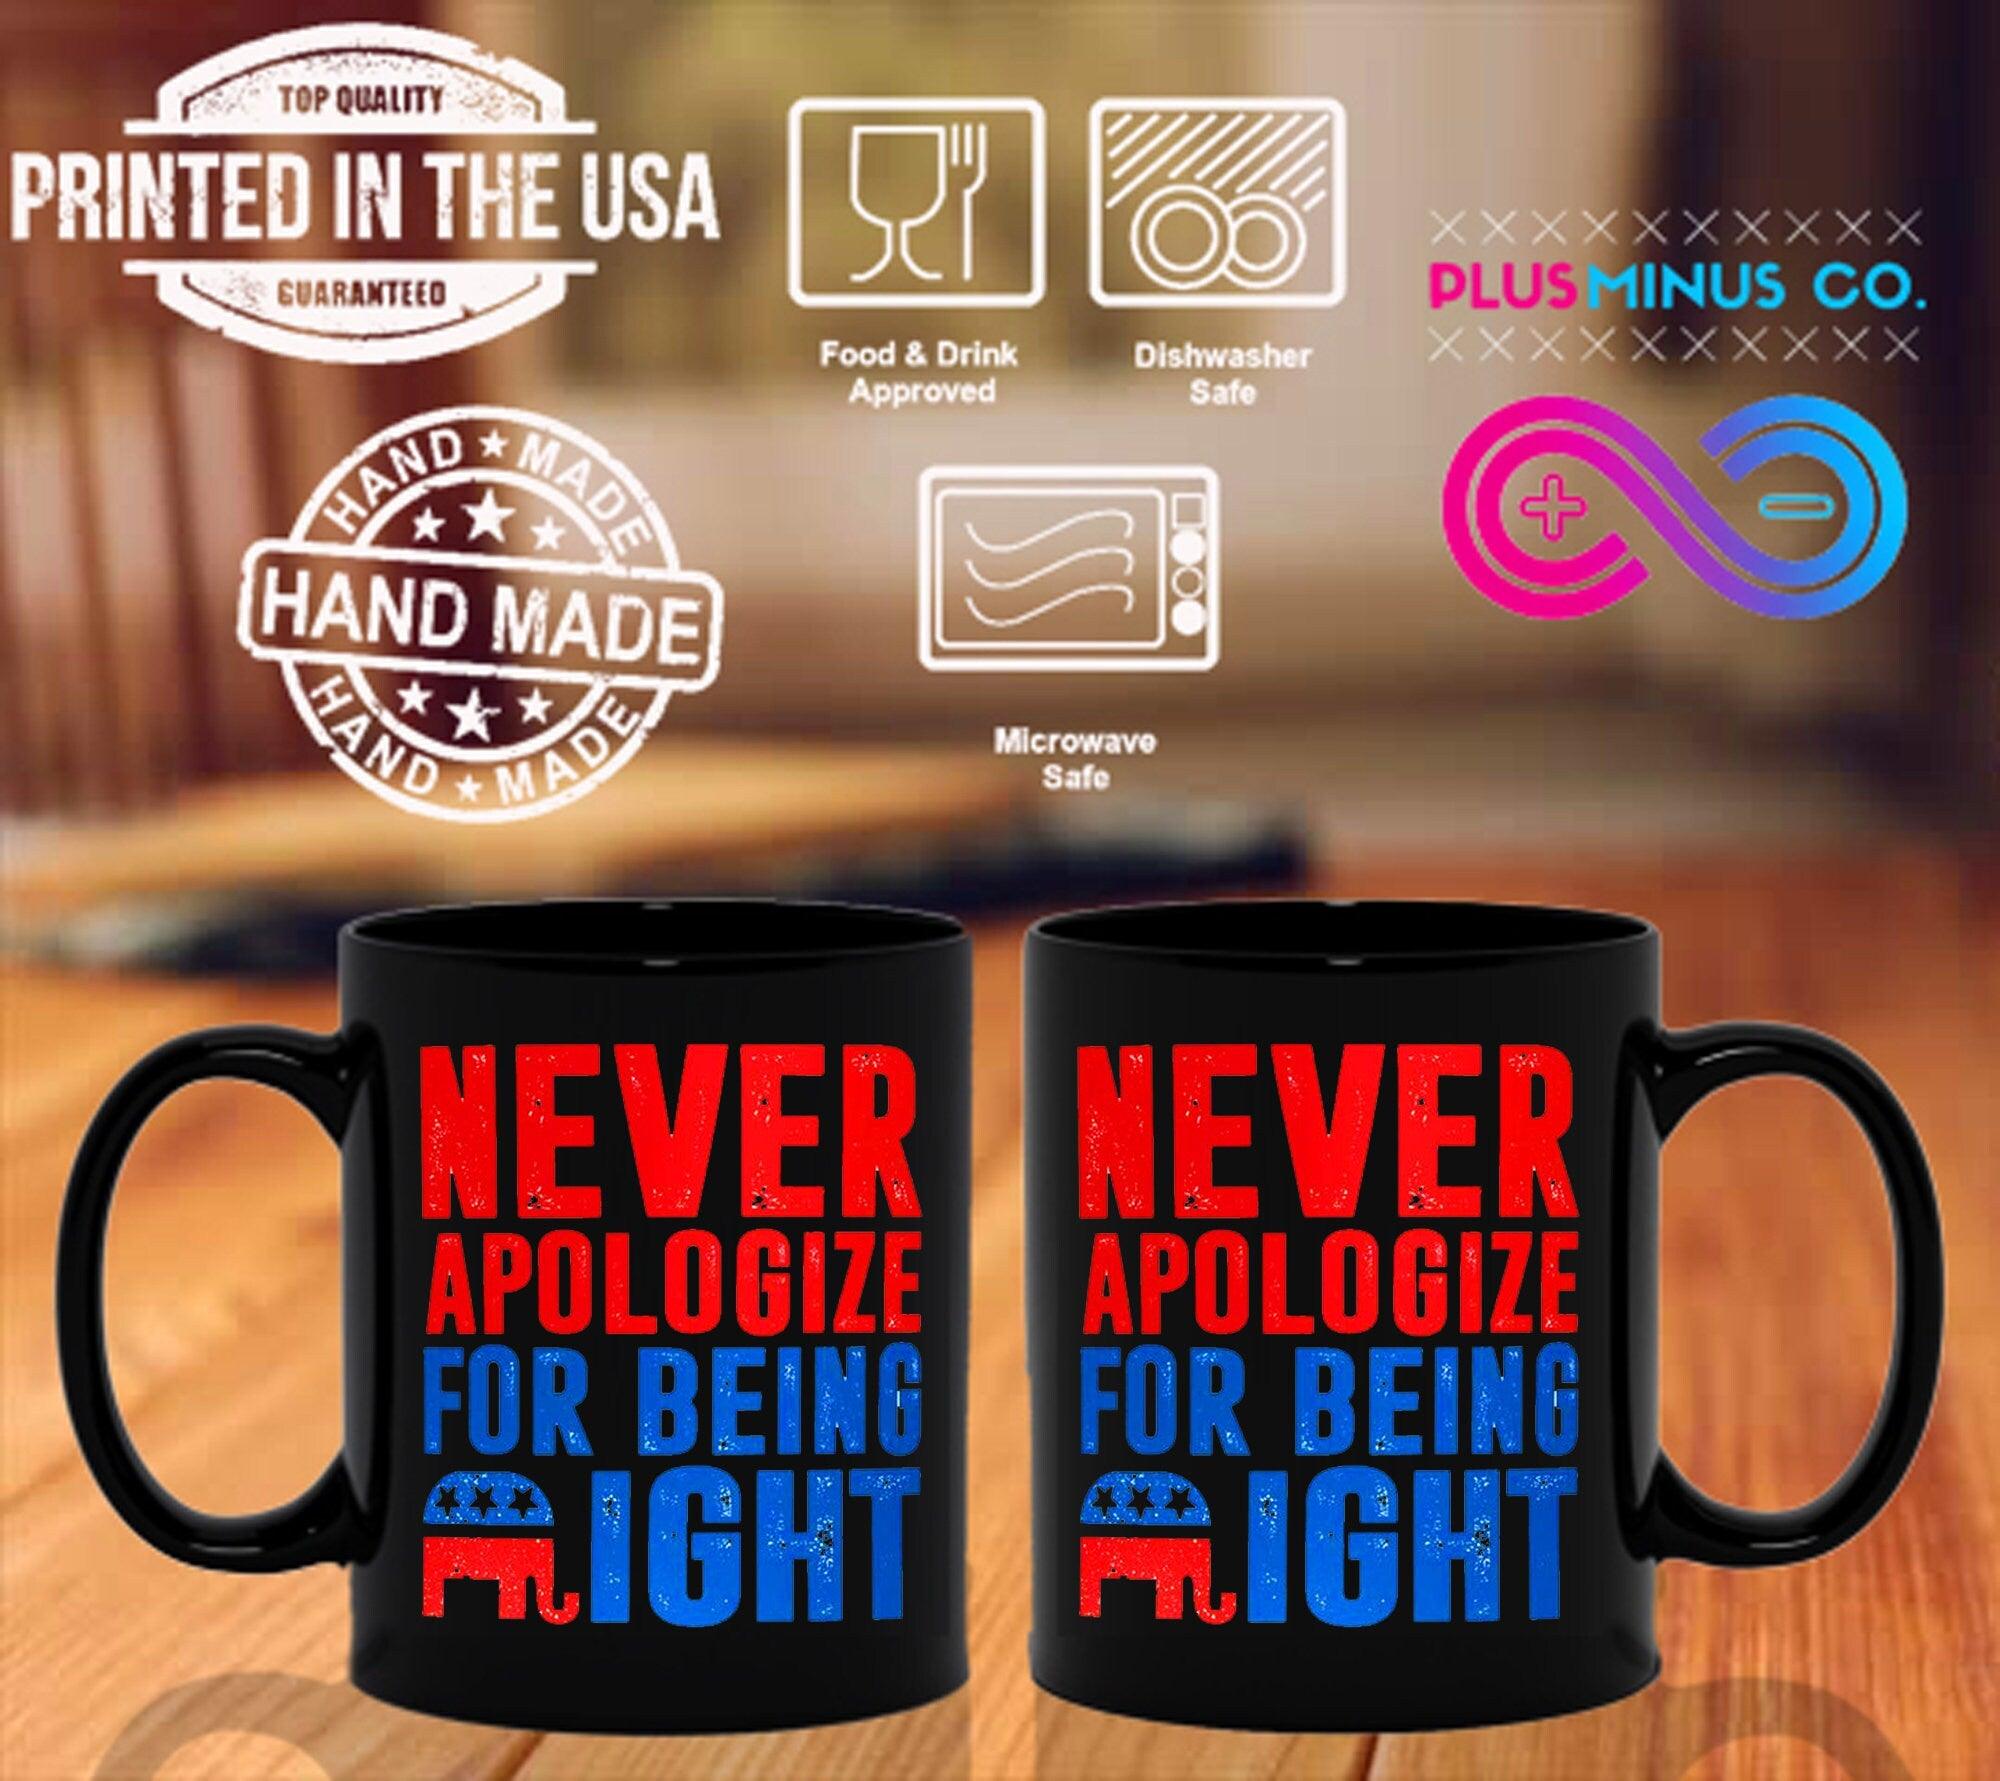 Never Apologize For Being Right Black Mugs Always right, Being right mug, Miss Right always, Mr Right Always, Never Apologize mug, Republican Dad, Republican Gift idea, Republican mug, Right is Right, right leaning mug, Right republican, right wing mug, Young Republican - plusminusco.com